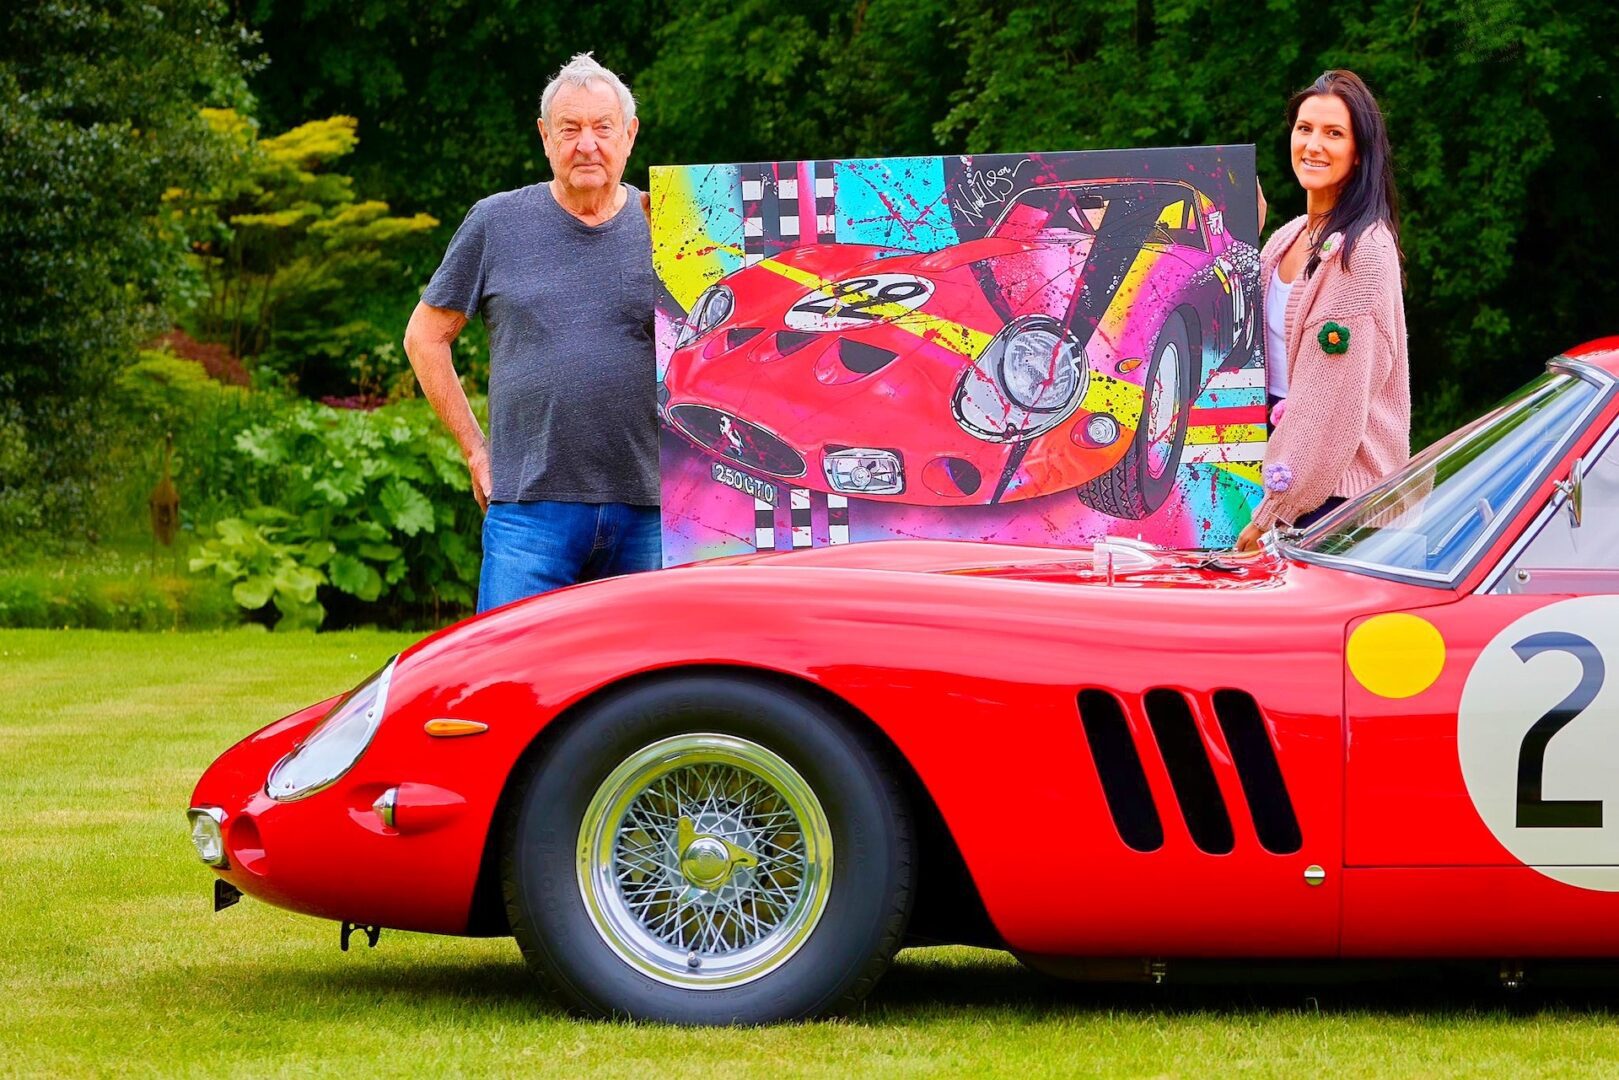 Nick and Emelie next to the 250 GTO muse!